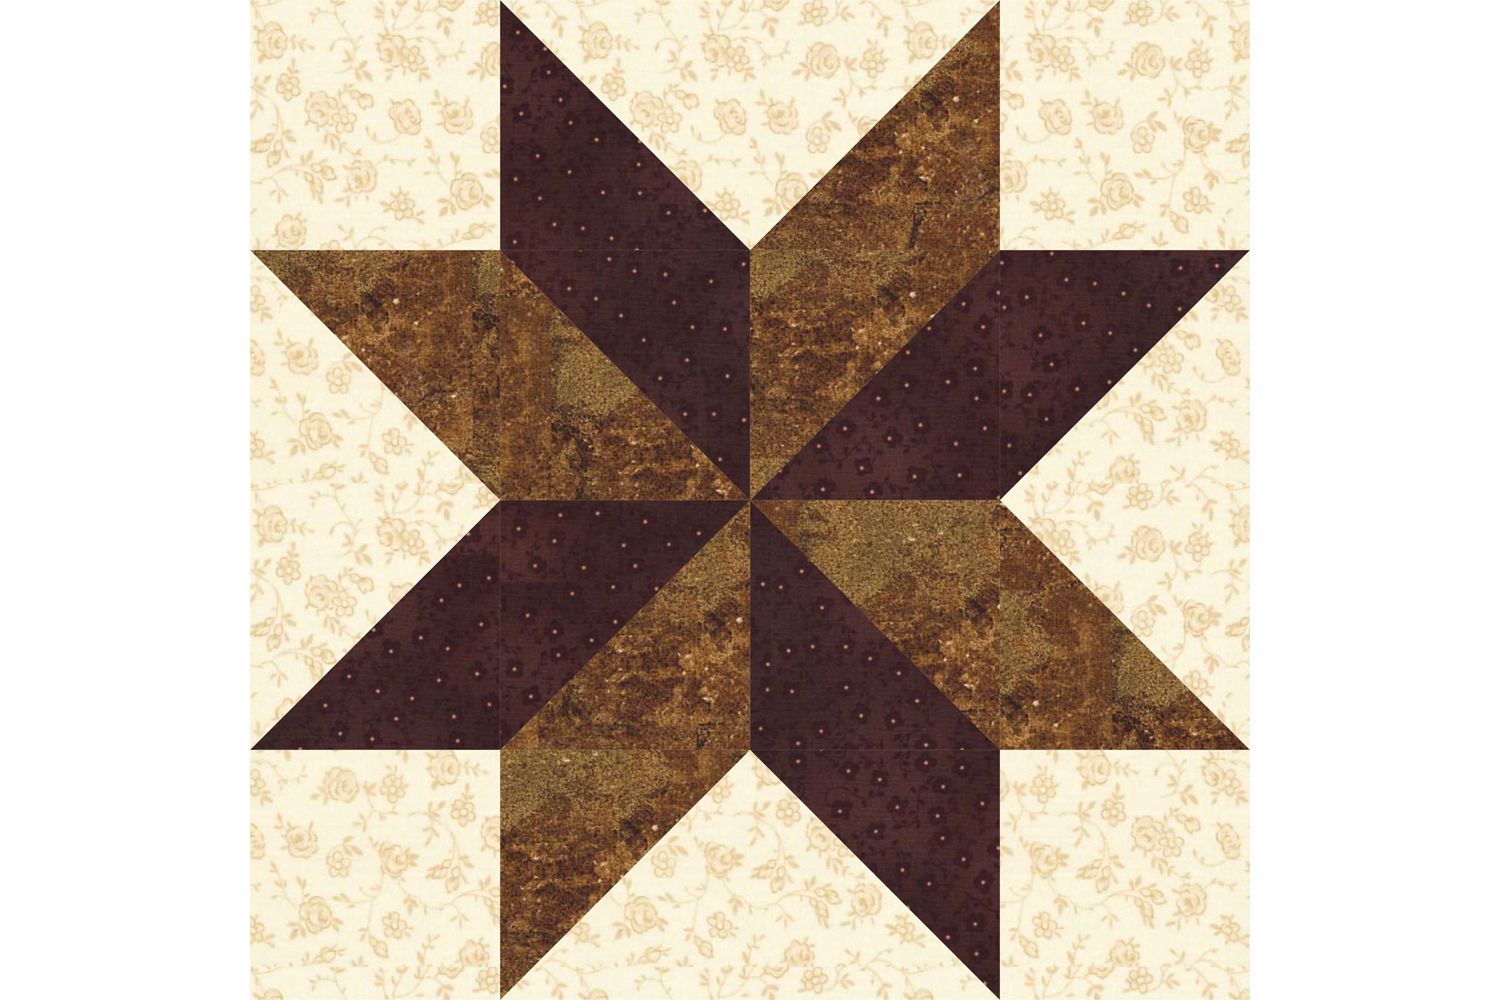 Download Sarah's Choice Quilt Block Pattern, an Easy Star Block